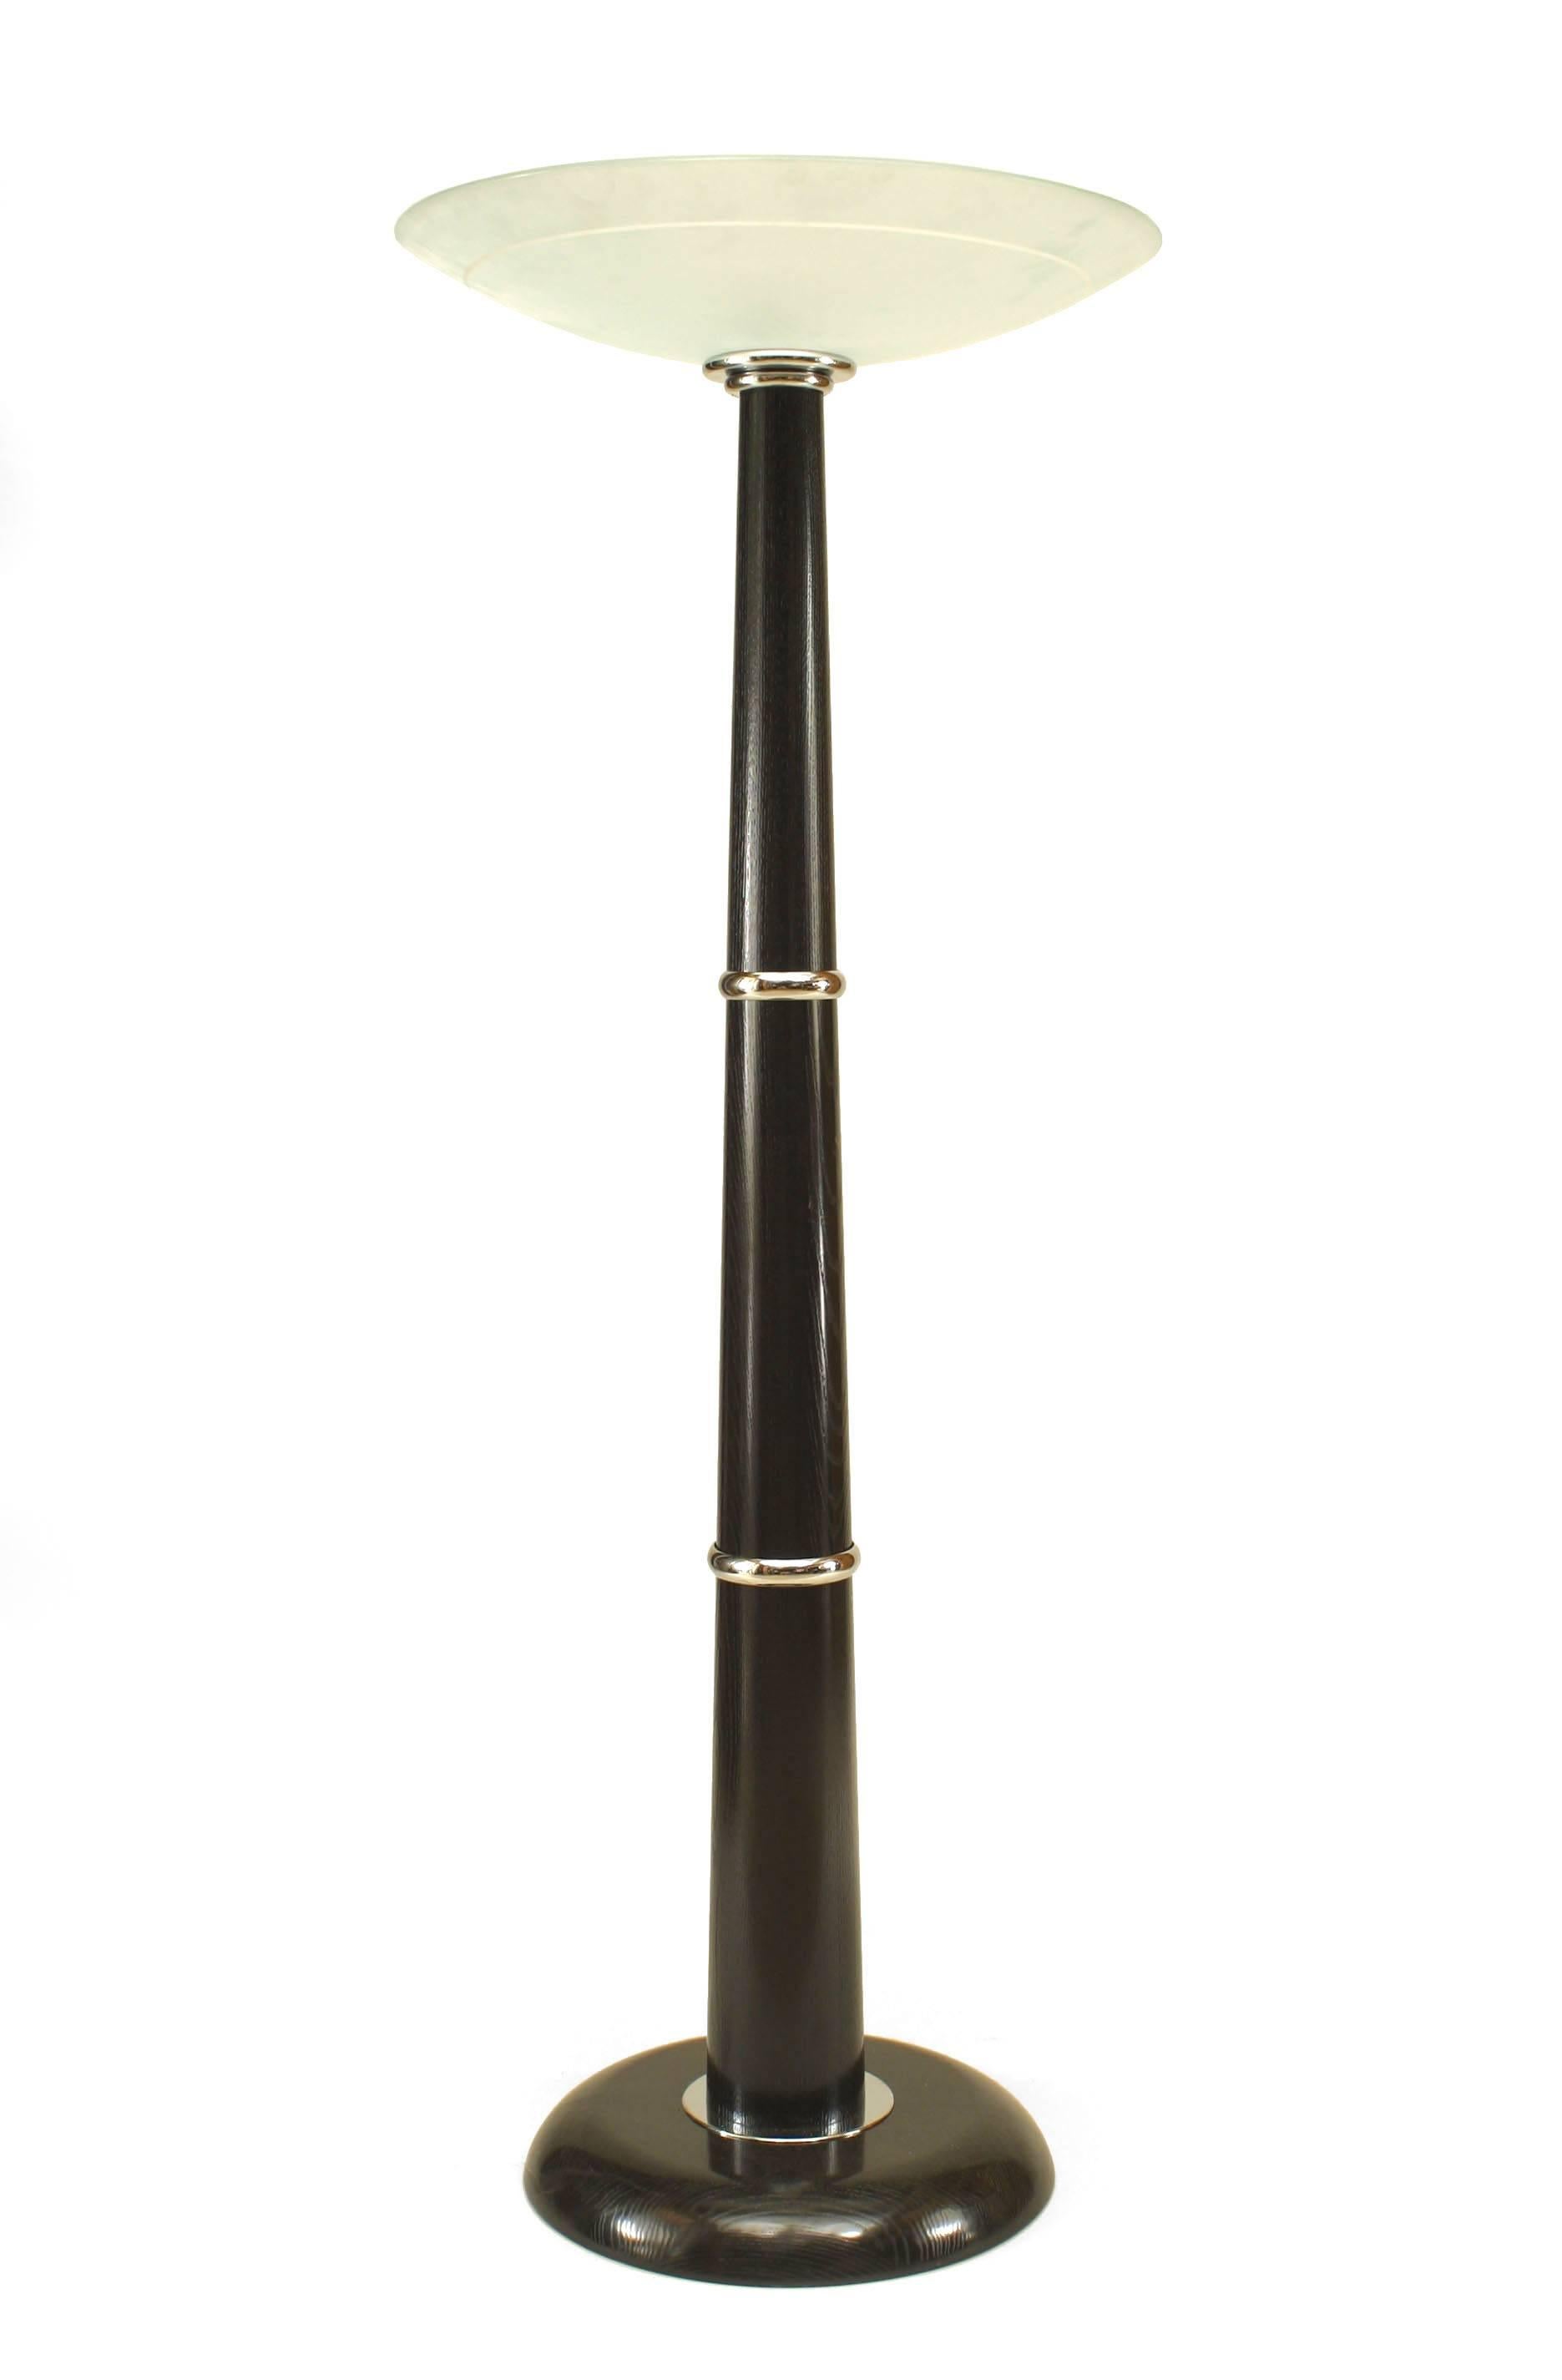 Pair of Italian ebonized wood and chrome trimmed floor lamps with a large frosted glass shade (similar Pair: VTP1660B)
